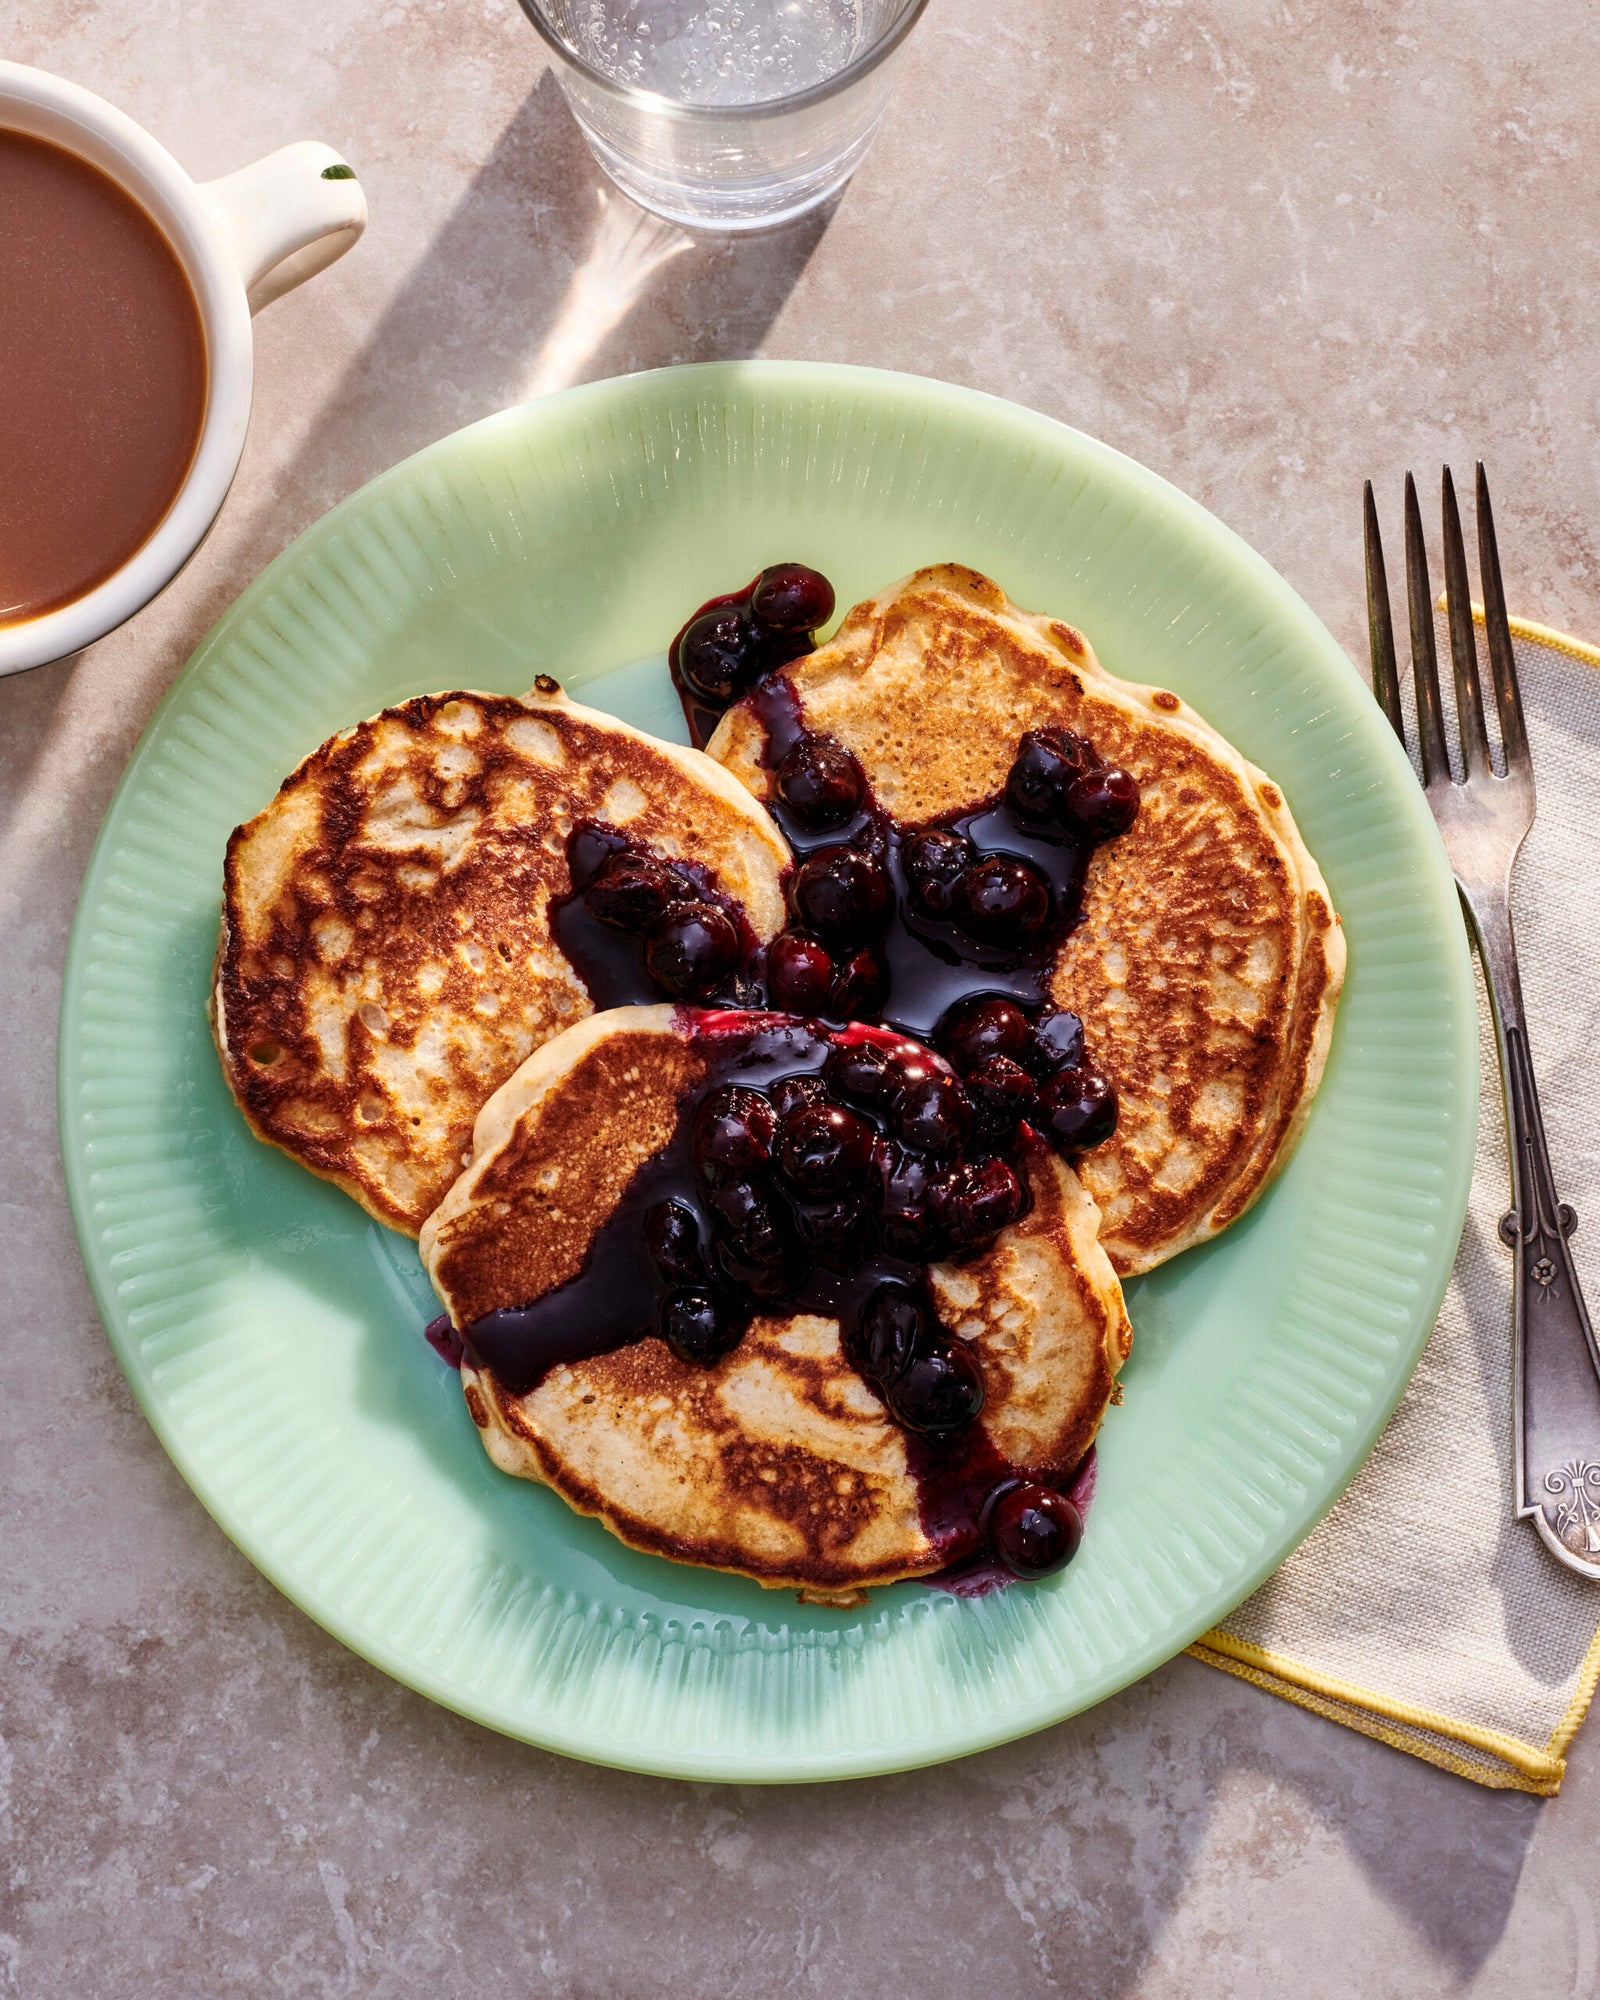 Whole Wheat Griddle Cakes with Fruit Compote